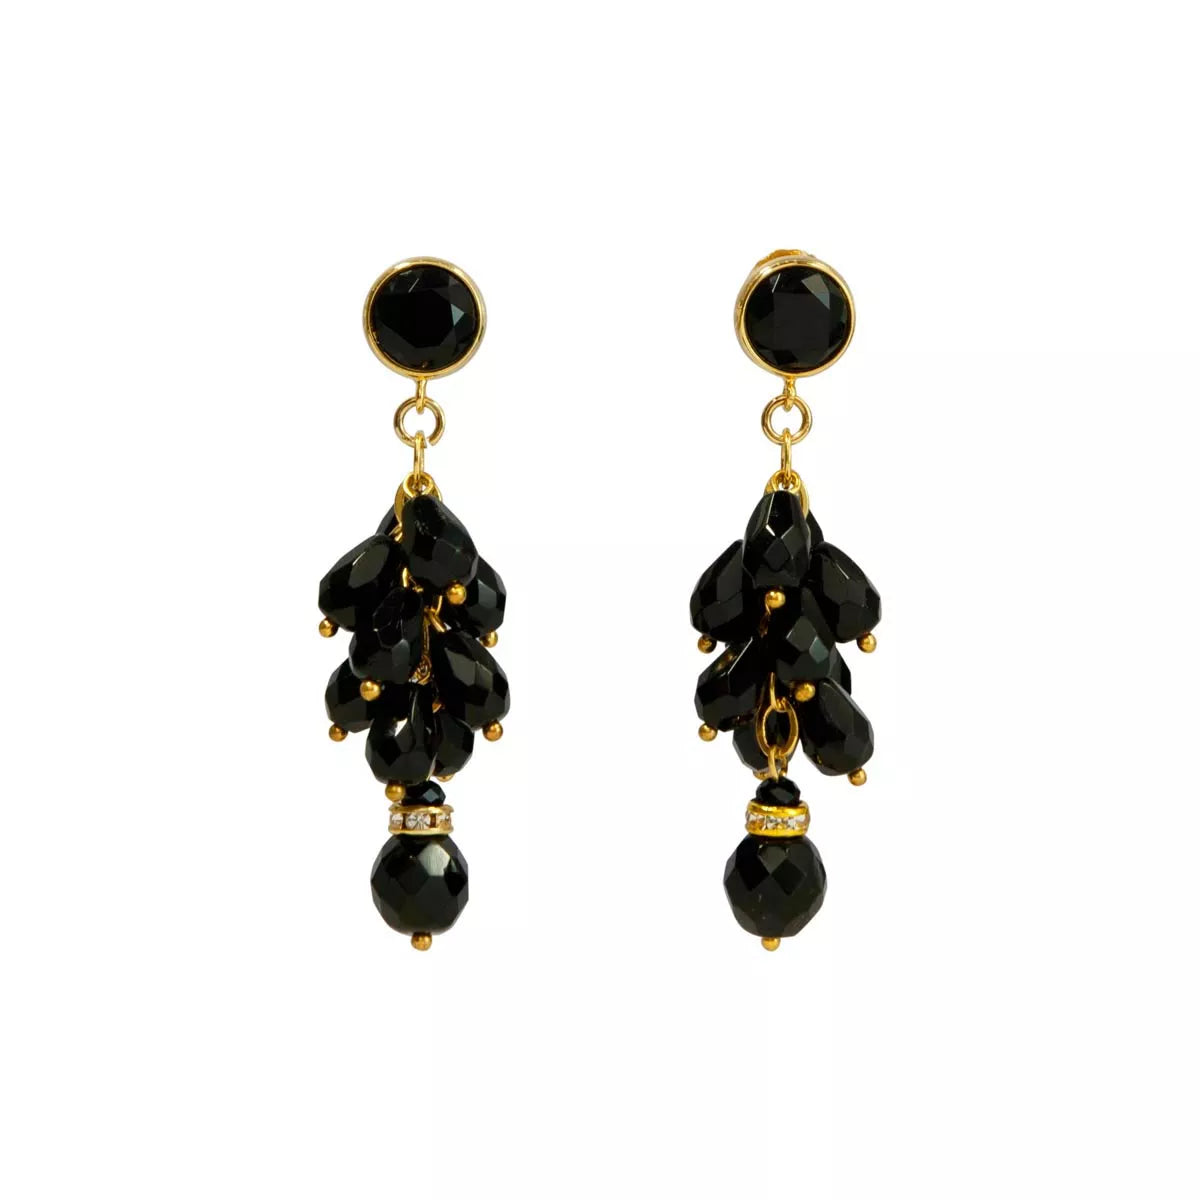 Drop earrings with black crystals